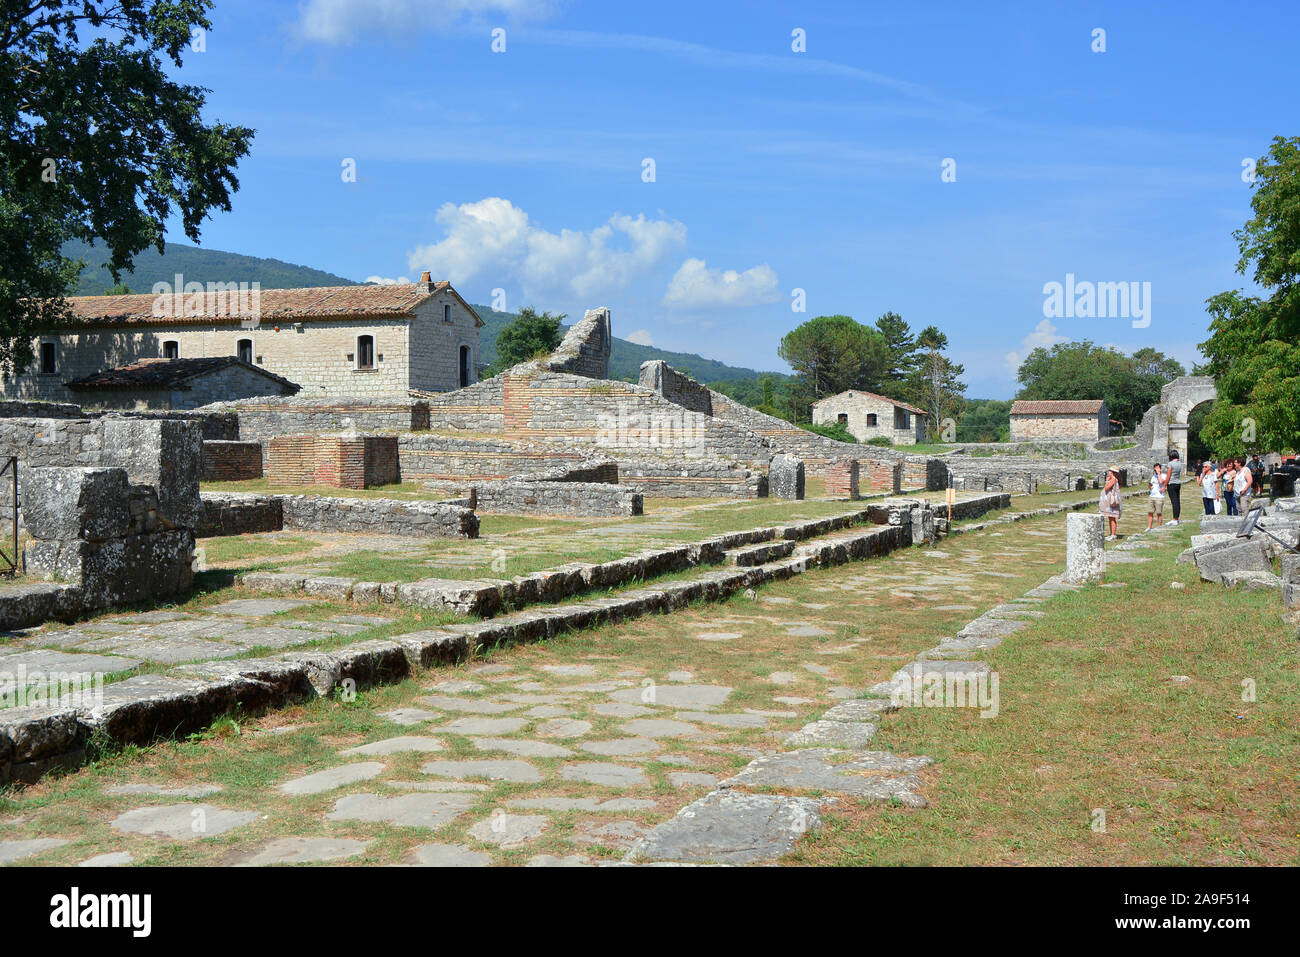 Sepino, Molise, Italy. Altilia the archaeological site located in Sepino, in the province of Campobasso. The name Altilia indicates the Roman city. Stock Photo